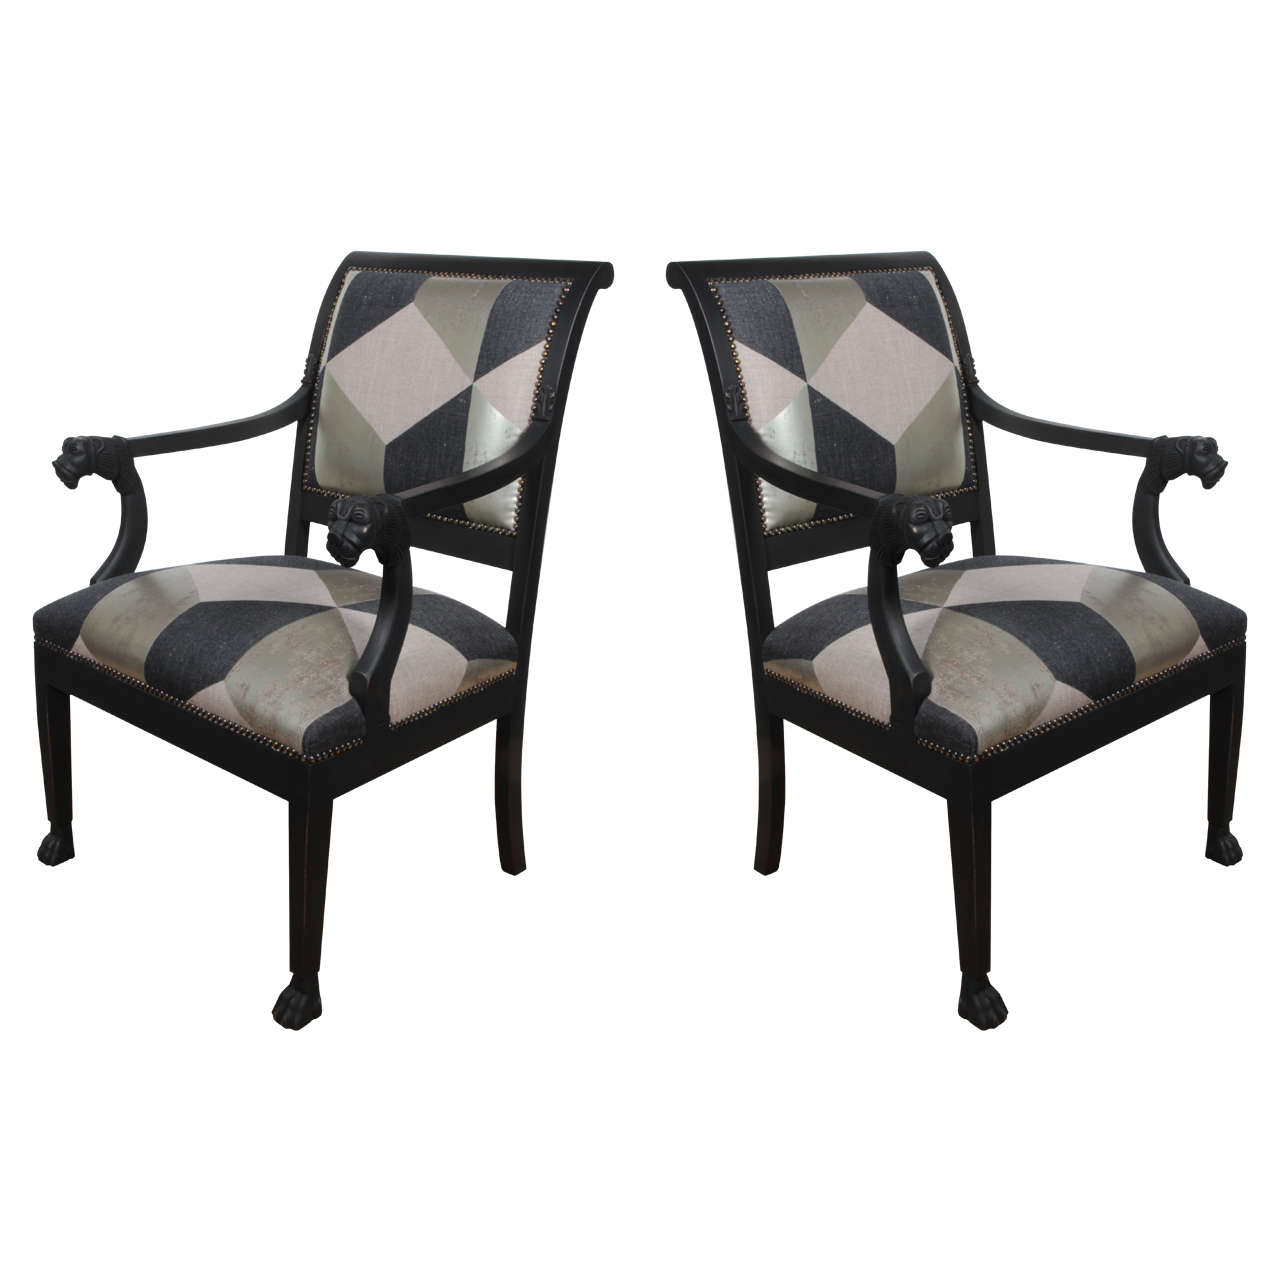 Black Bergeres with Black and Silver Upholstery